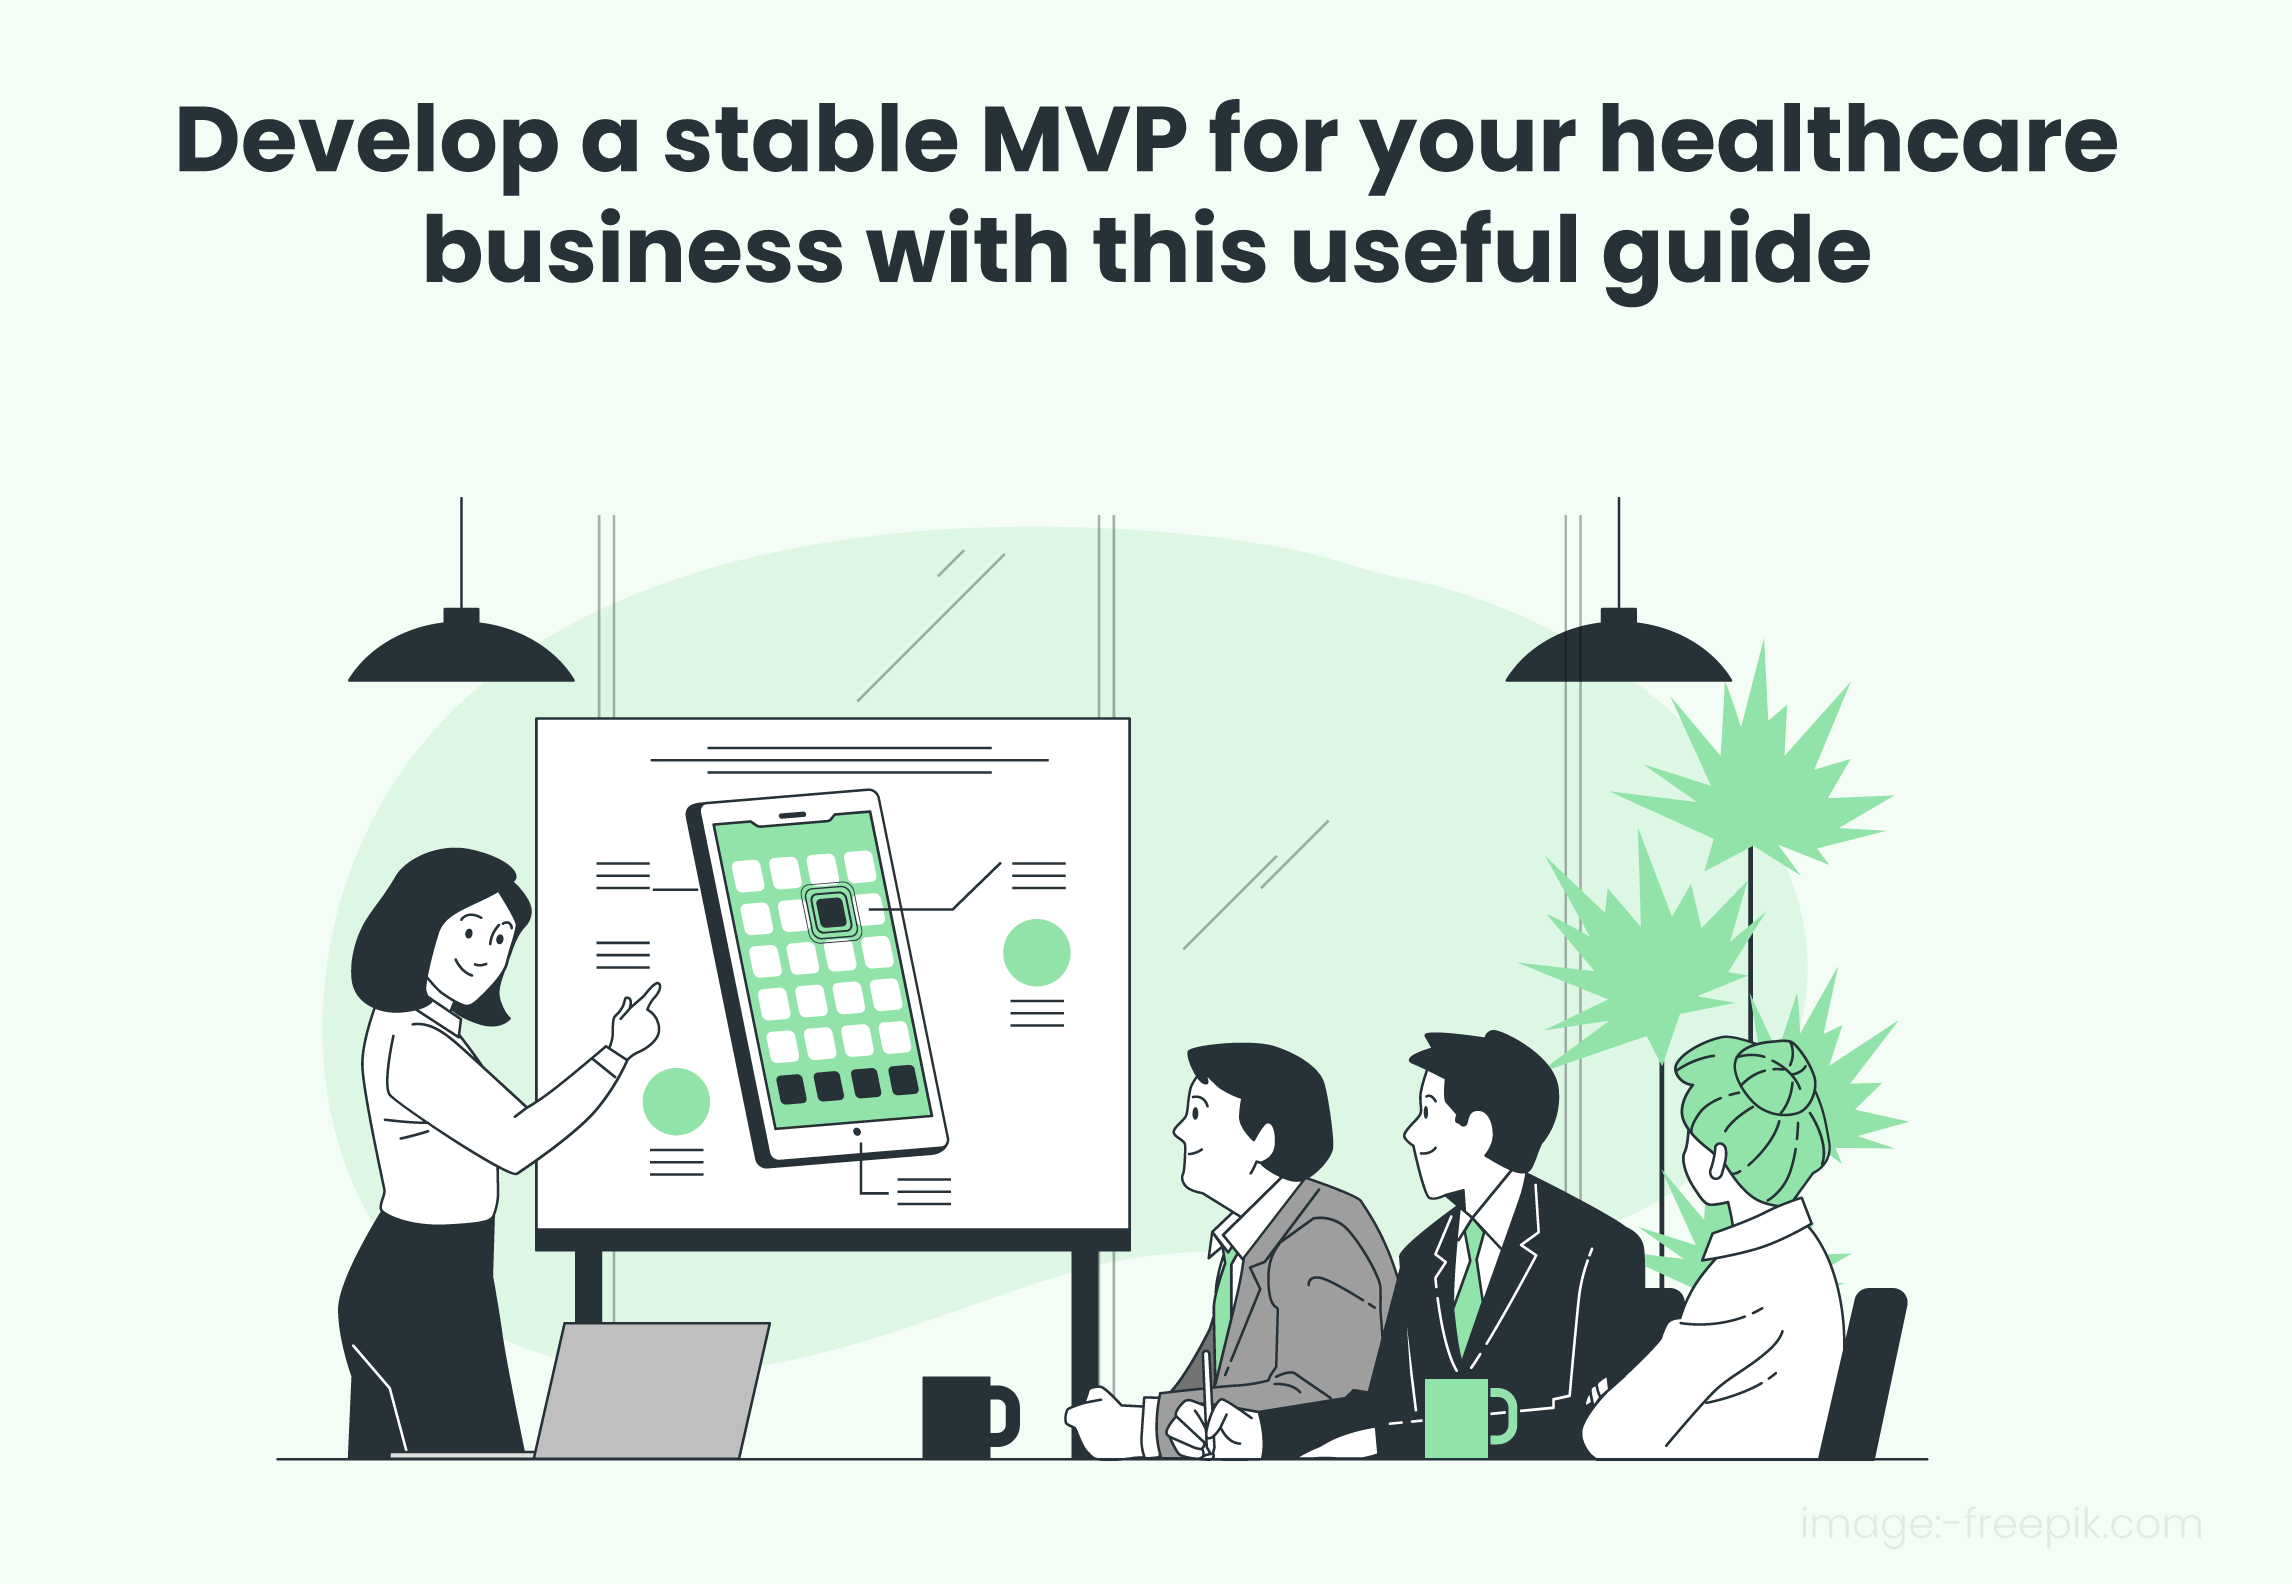 Develop a stable MVP for your healthcare business with this useful guide